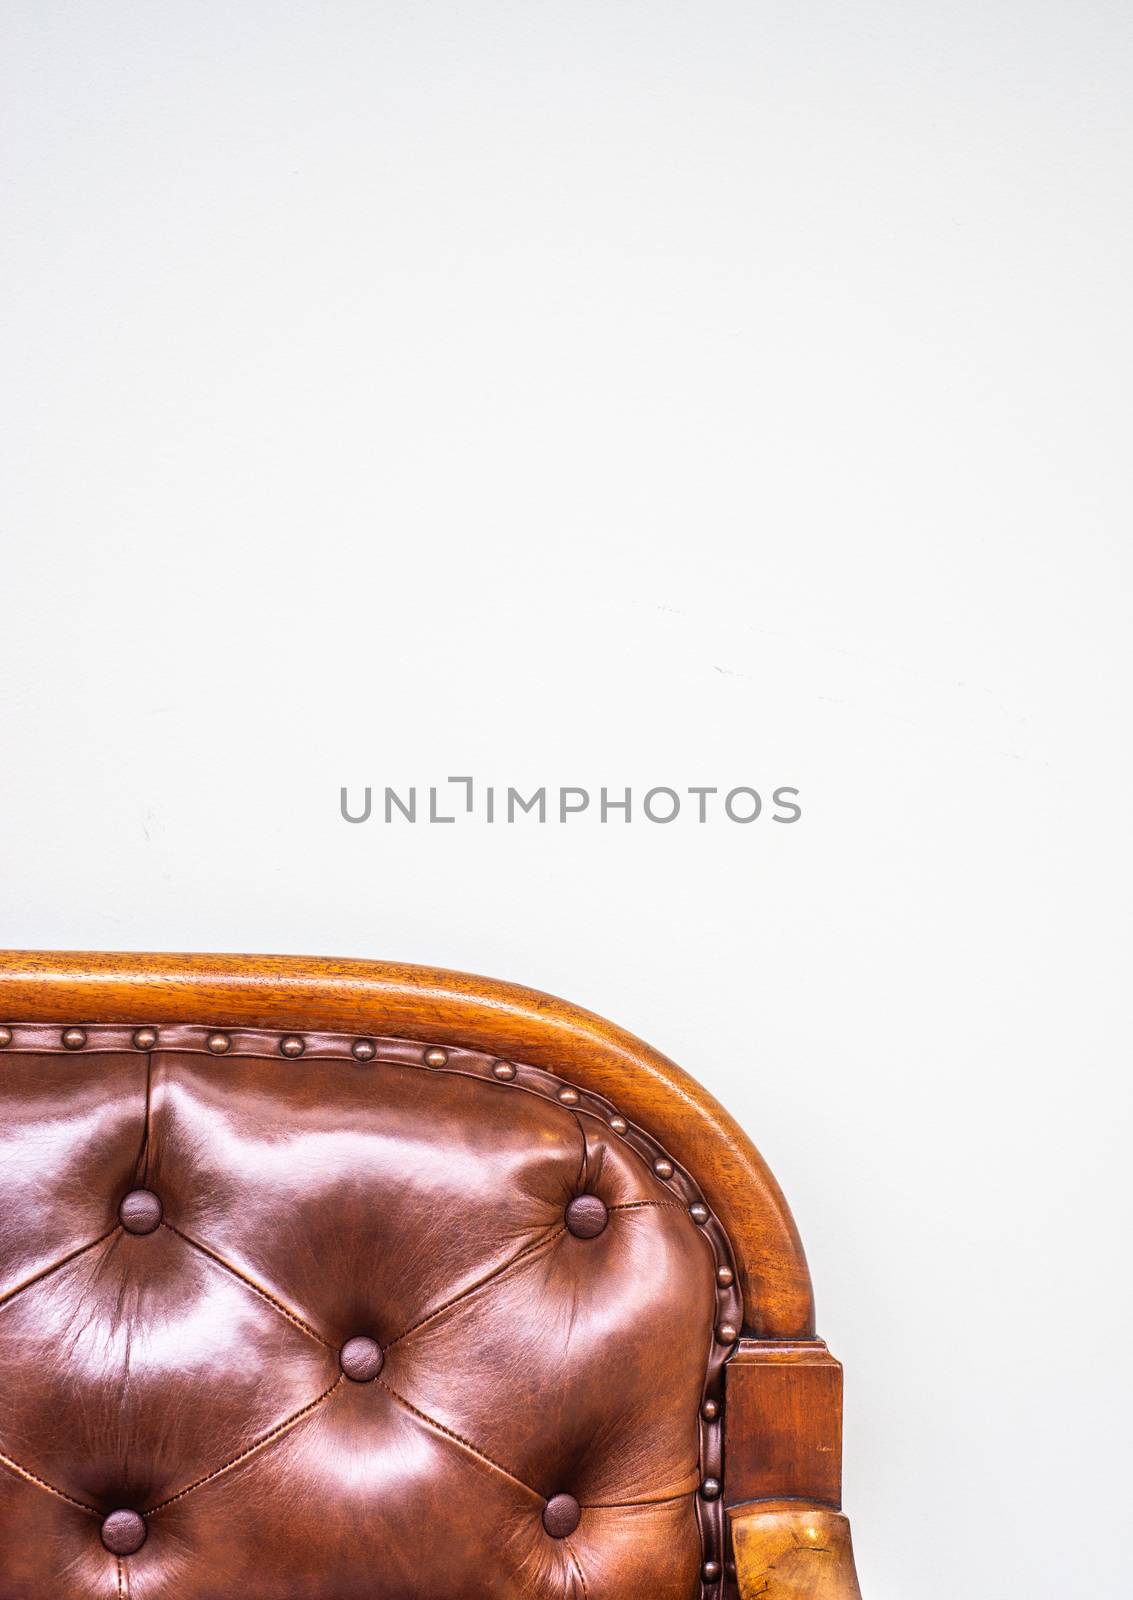 Antique Furniture Detail With Copy Space by mrdoomits